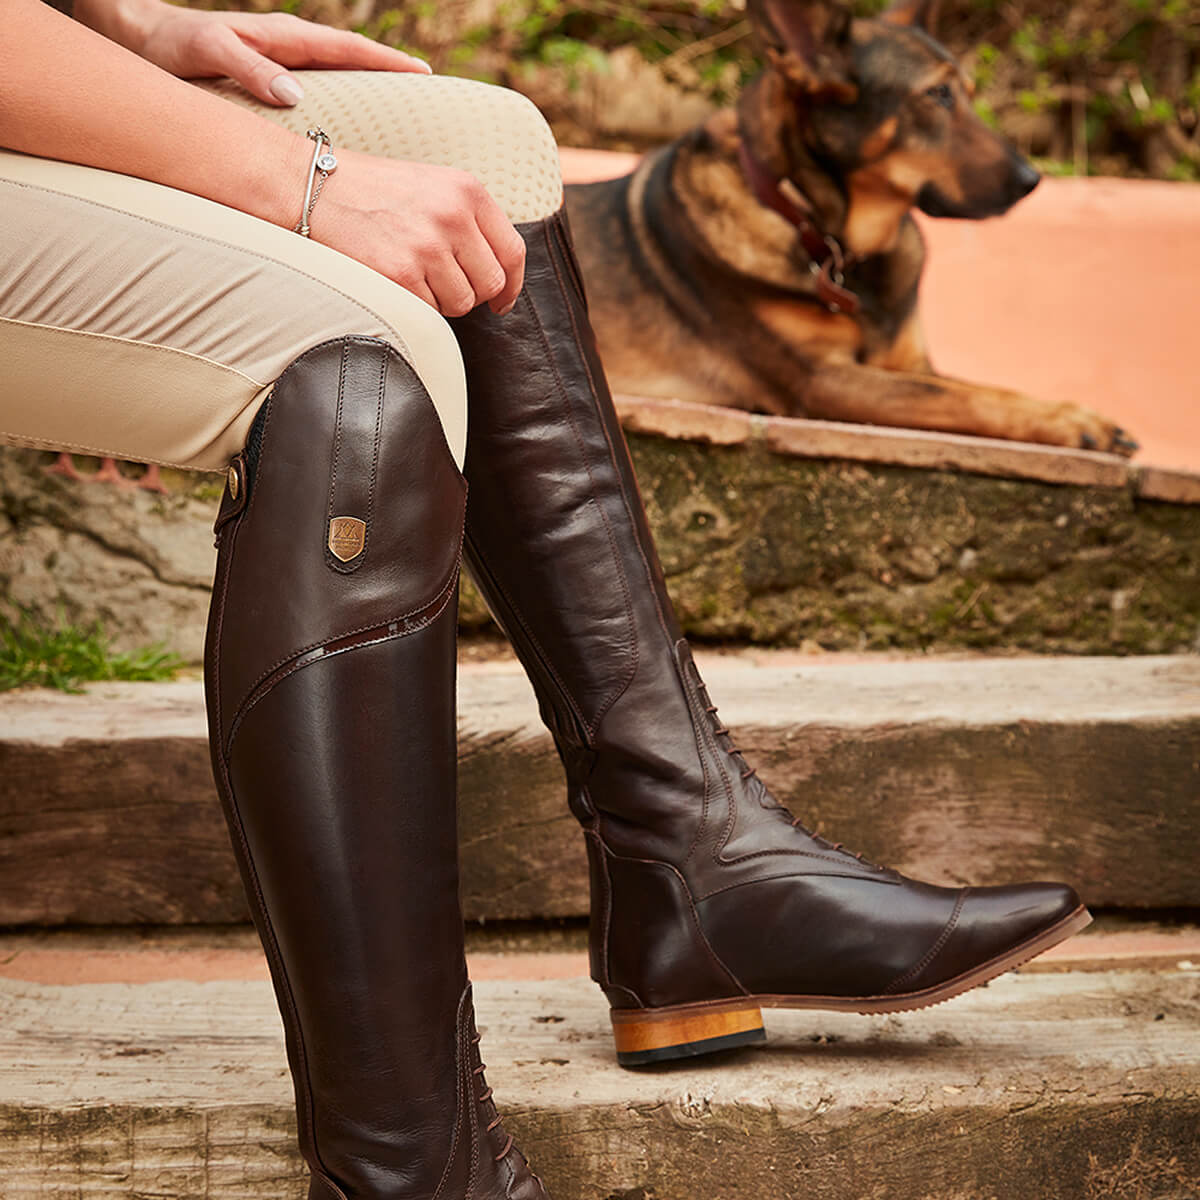 Mountain Horse Equestrian Renown Legging Durable Comfort Leather Riding Boots 